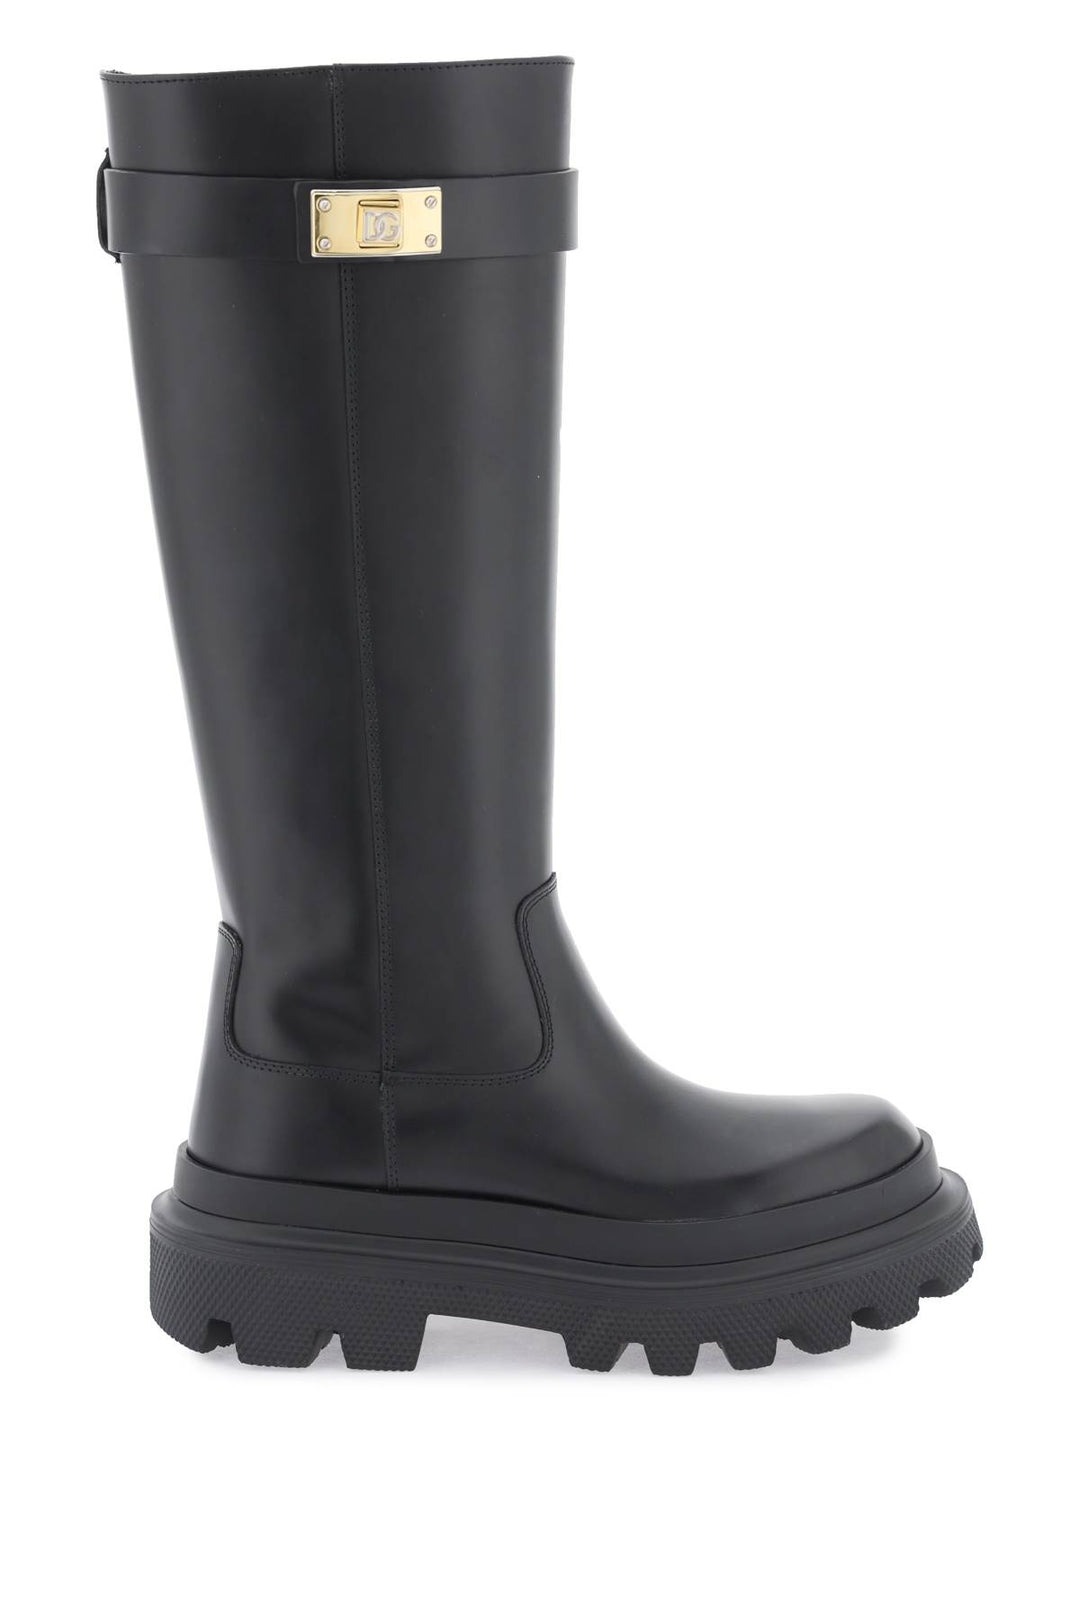 Dolce & Gabbana Leather Boots With Logoed Plaquee   Nero